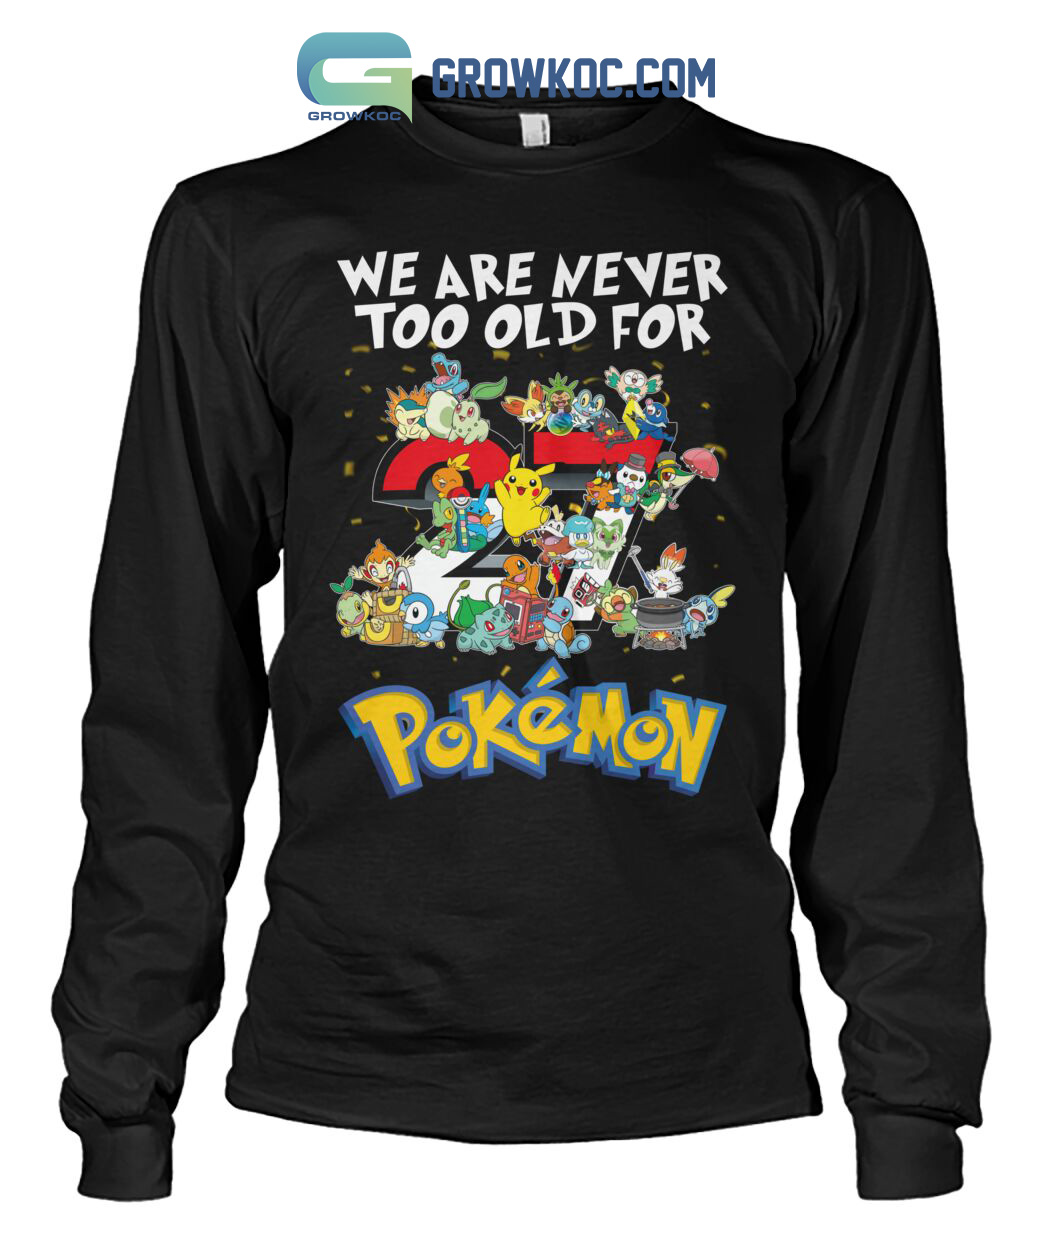 We Are Never Too Old For Pokemon T-Shirt